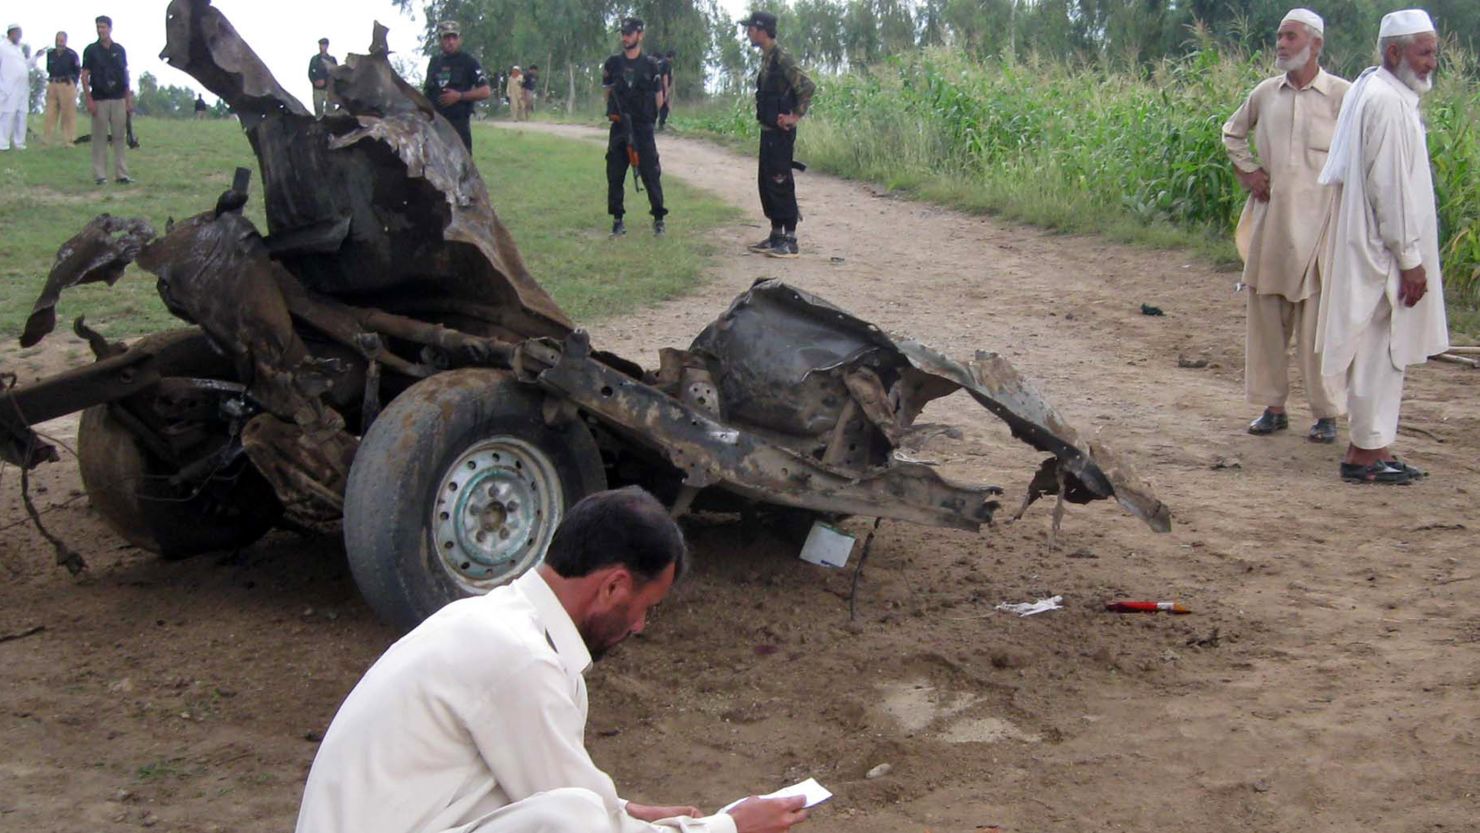 Pakistani security officials work at the site of a bomb blast in Jandol town, in the district of Lower Dir.